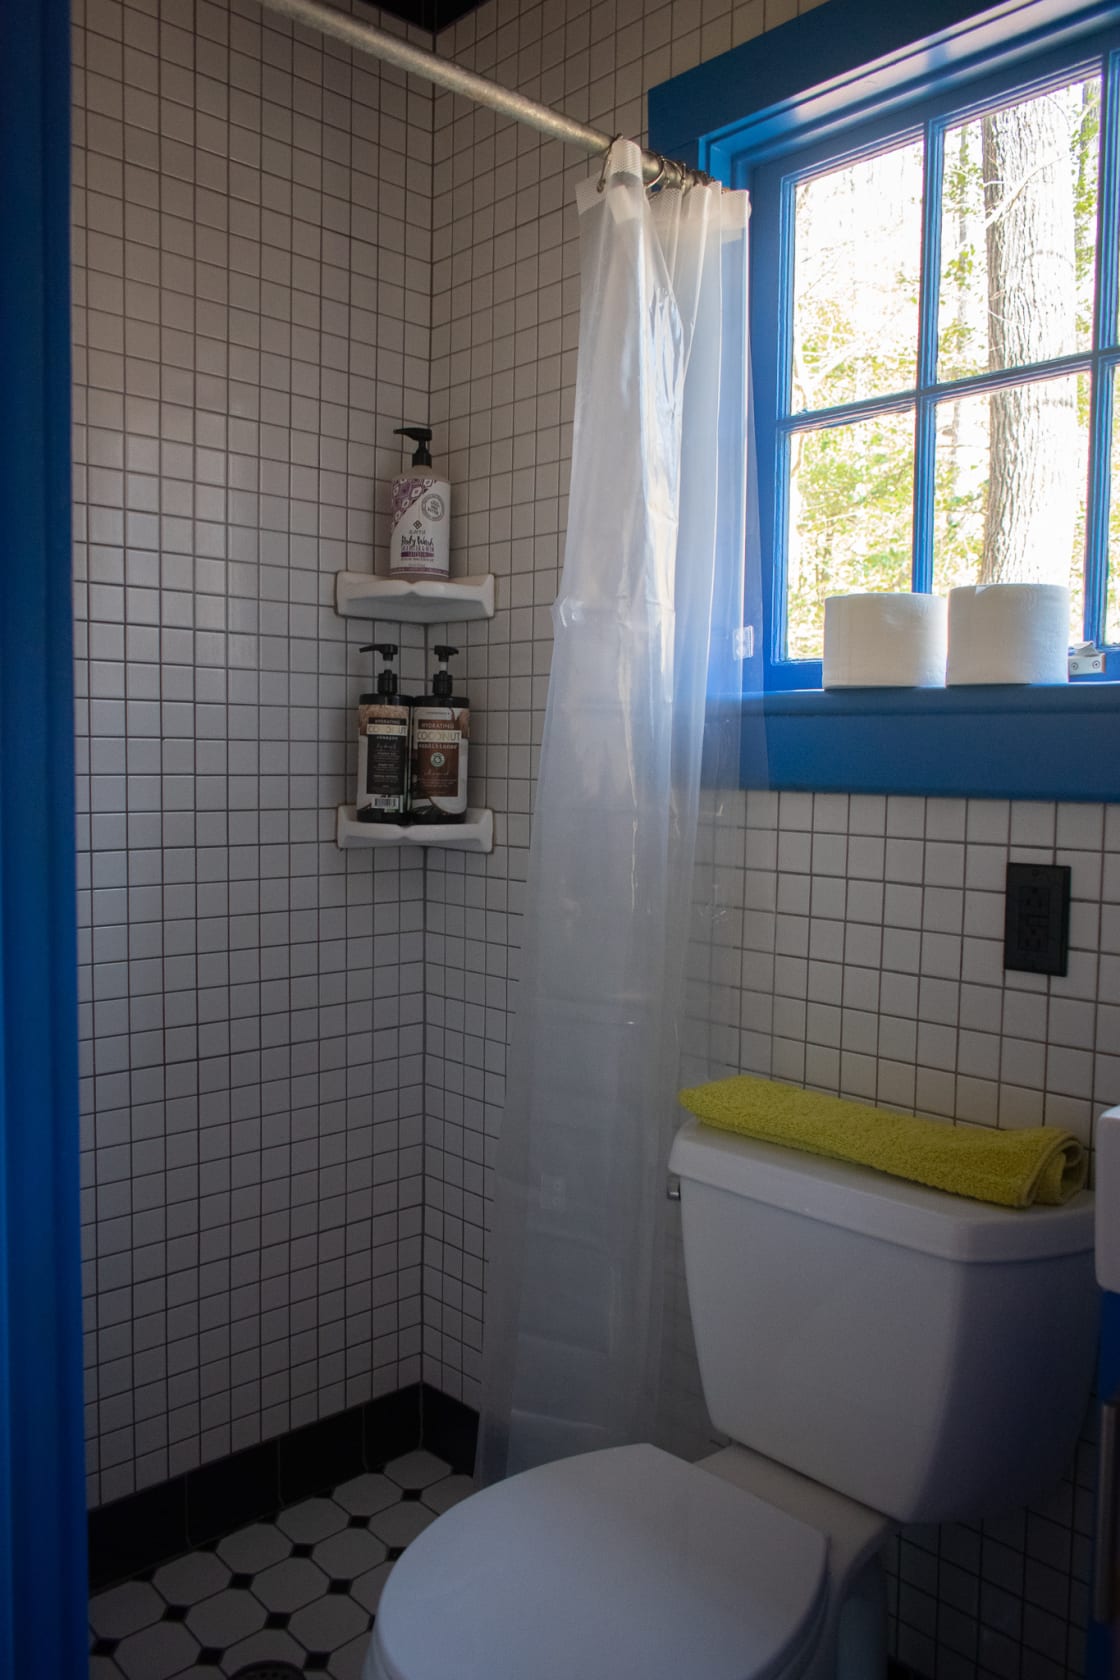 The full bath in the tiny house comes with great shampoo, conditioner, and soap. 